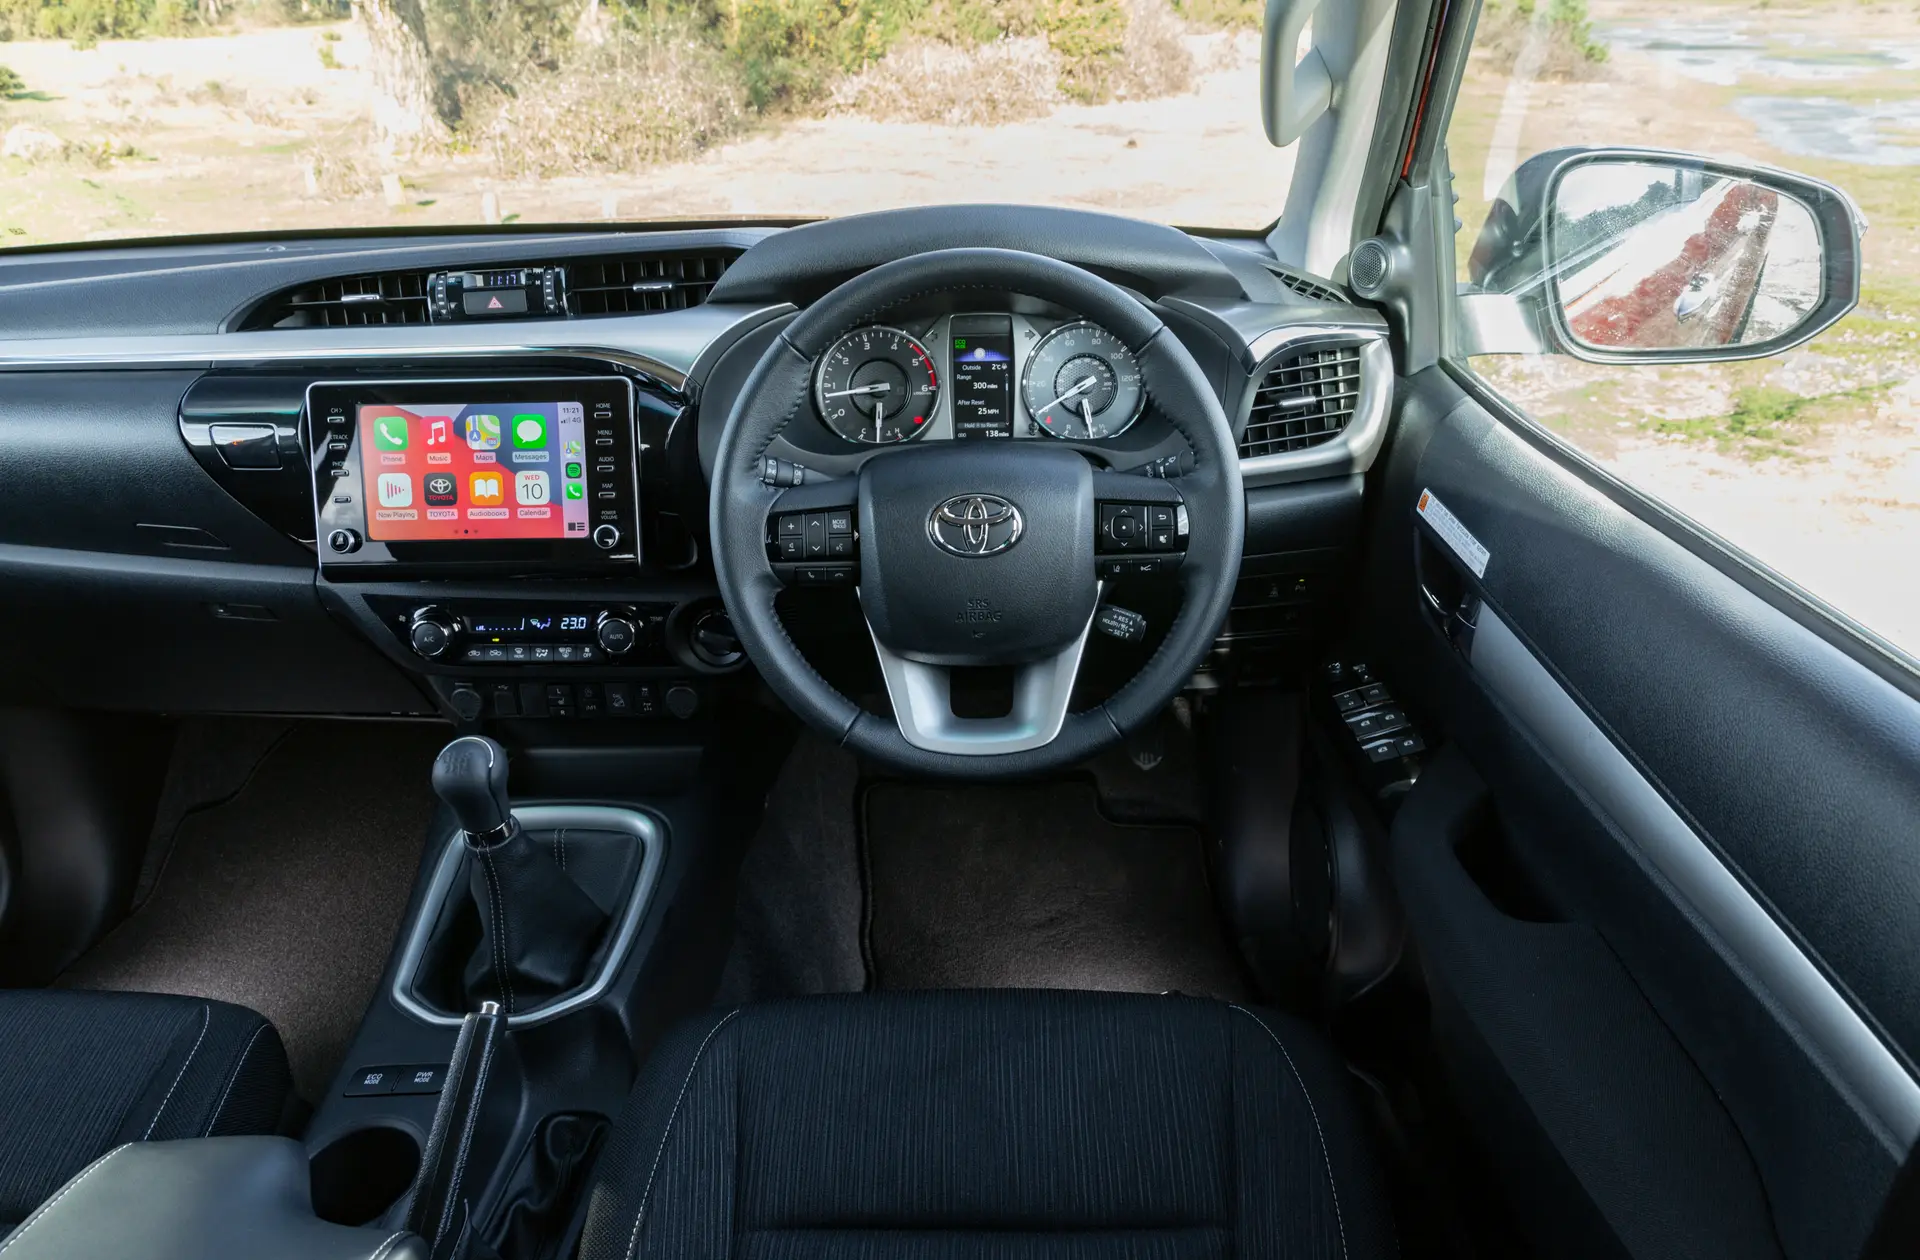 Toyota Hilux Review: interior